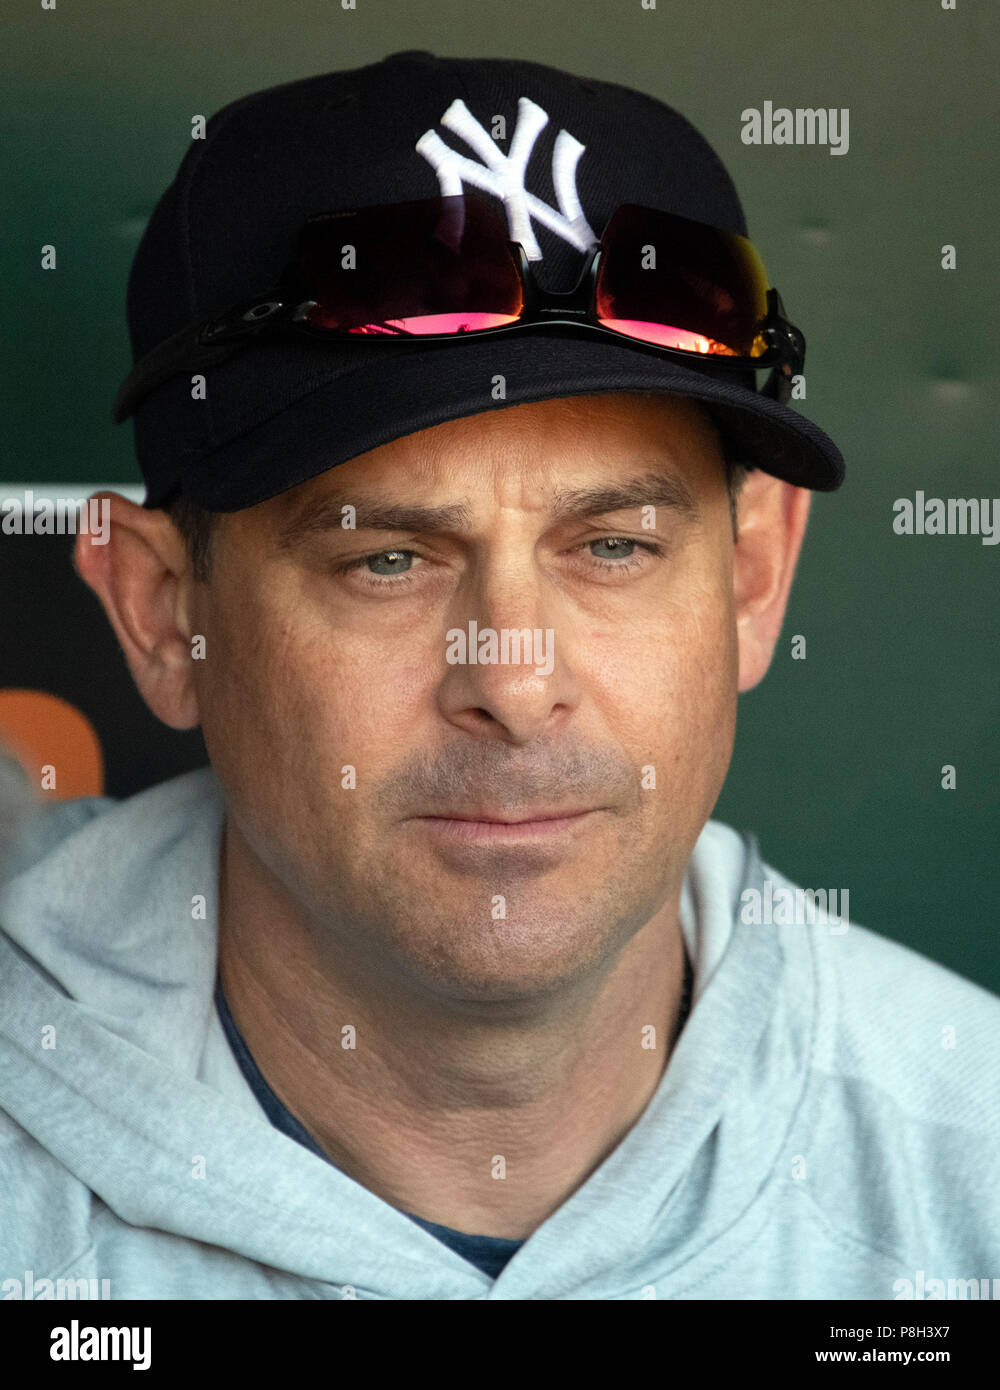 Baltimore, United States Of America. 10th July, 2018. New York Yankees manager Aaron Boone (17) conducts his pregame press conference in the dugout prior to the game against the Baltimore Orioles at Oriole Park at Camden Yards in Baltimore, MD on Tuesday, July 10, 2018. Credit: Ron Sachs/CNP (RESTRICTION: NO New York or New Jersey Newspapers or newspapers within a 75 mile radius of New York City) | usage worldwide Credit: dpa/Alamy Live News Stock Photo